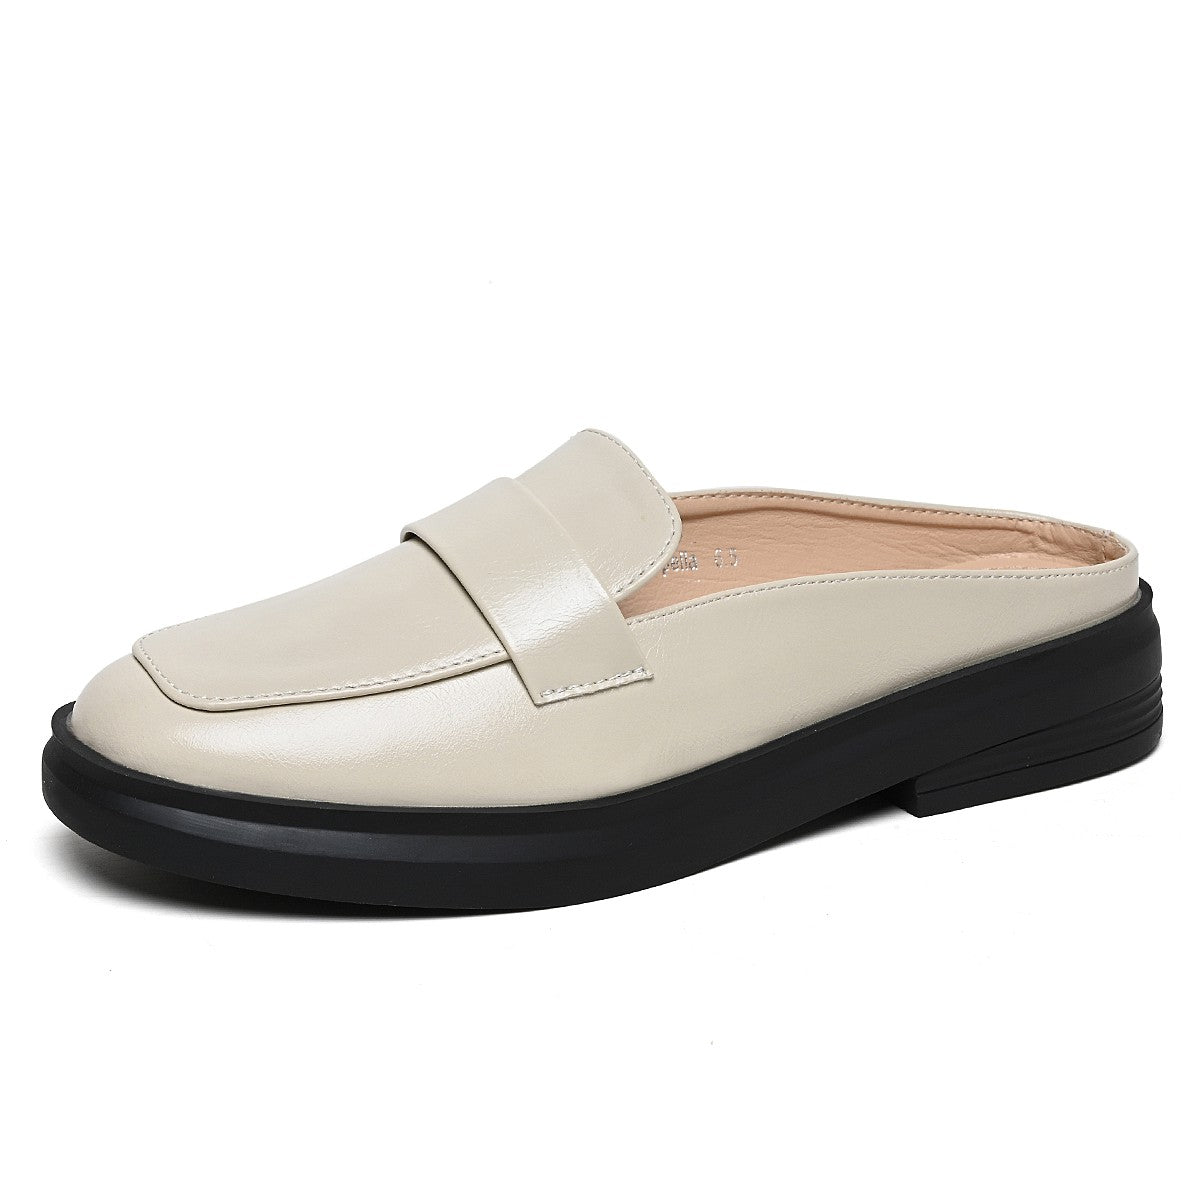 Cambria Oyster Penny Loafers